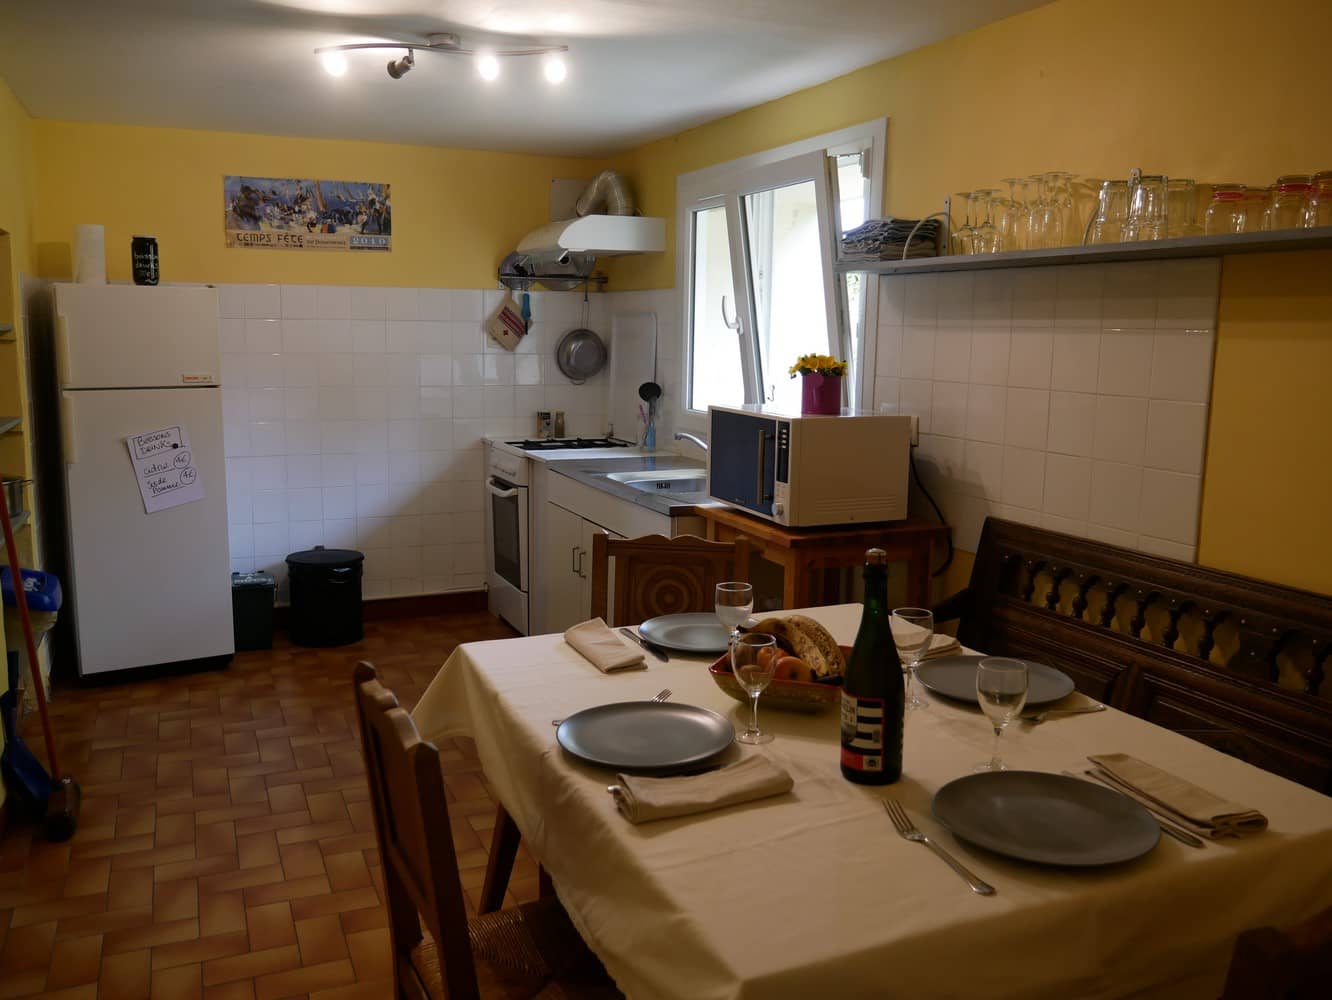 kitchen available for our b&b guests